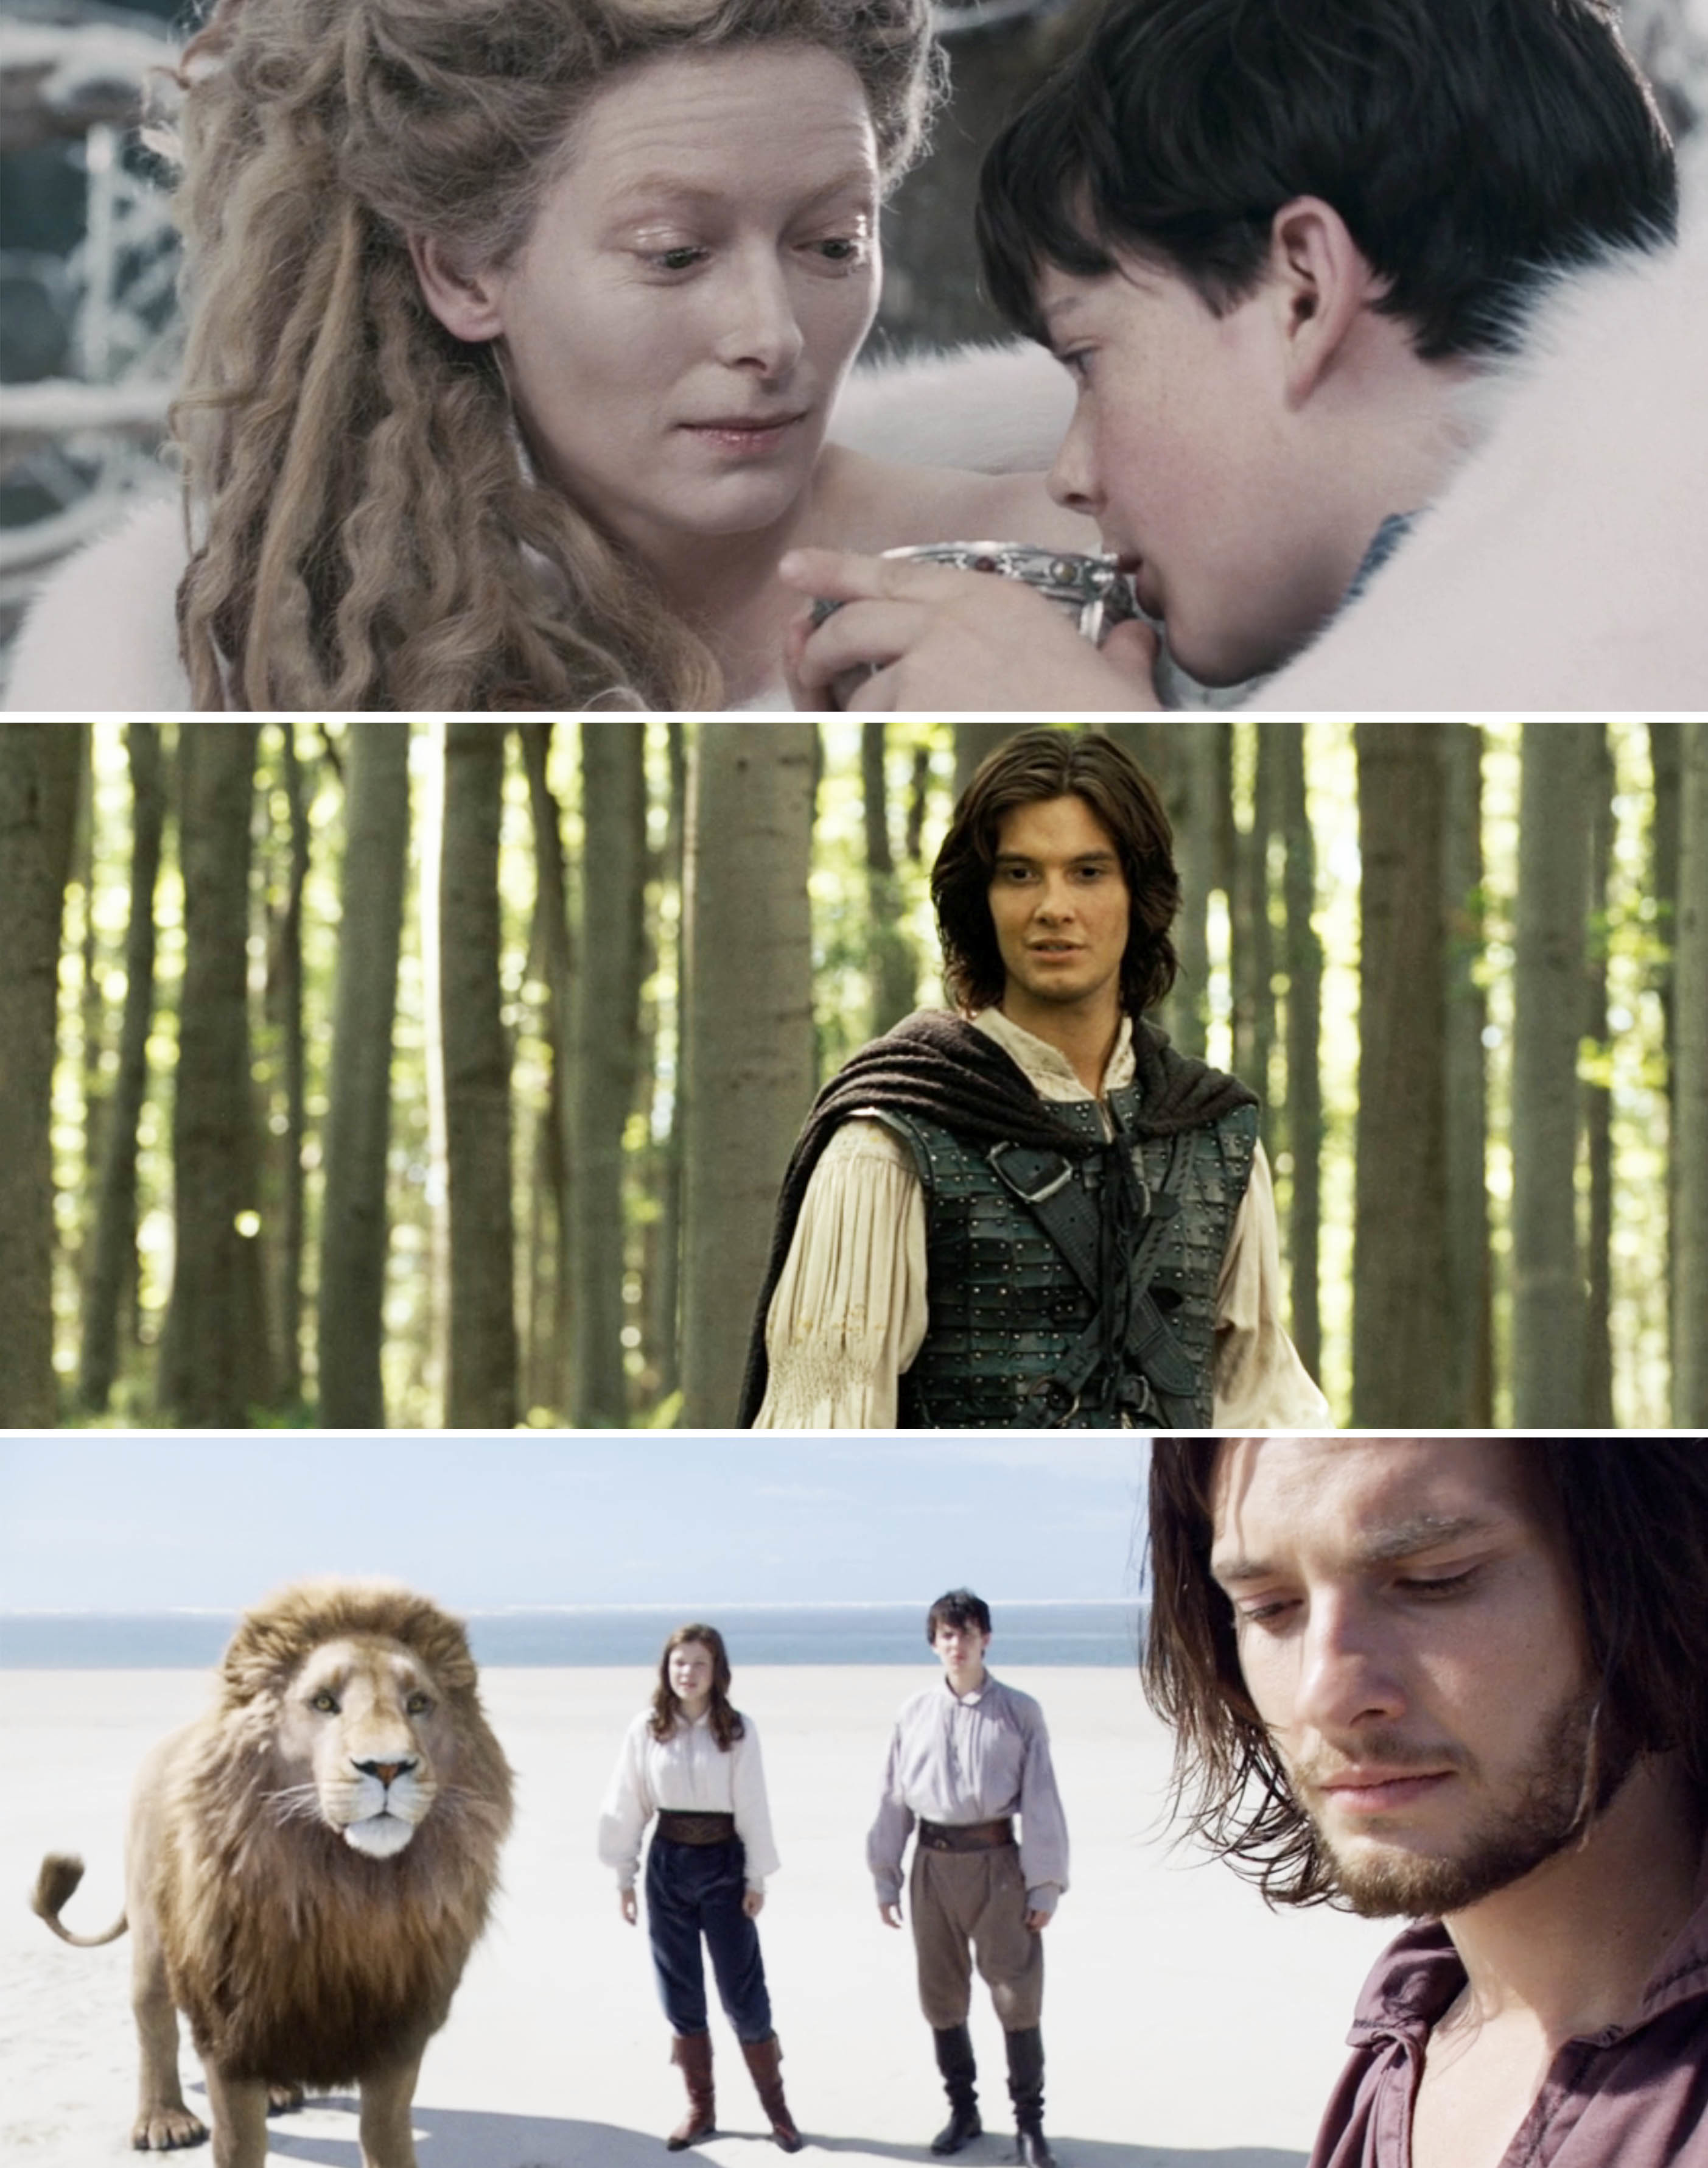 Screenshots from the &quot;Narnia&quot; films